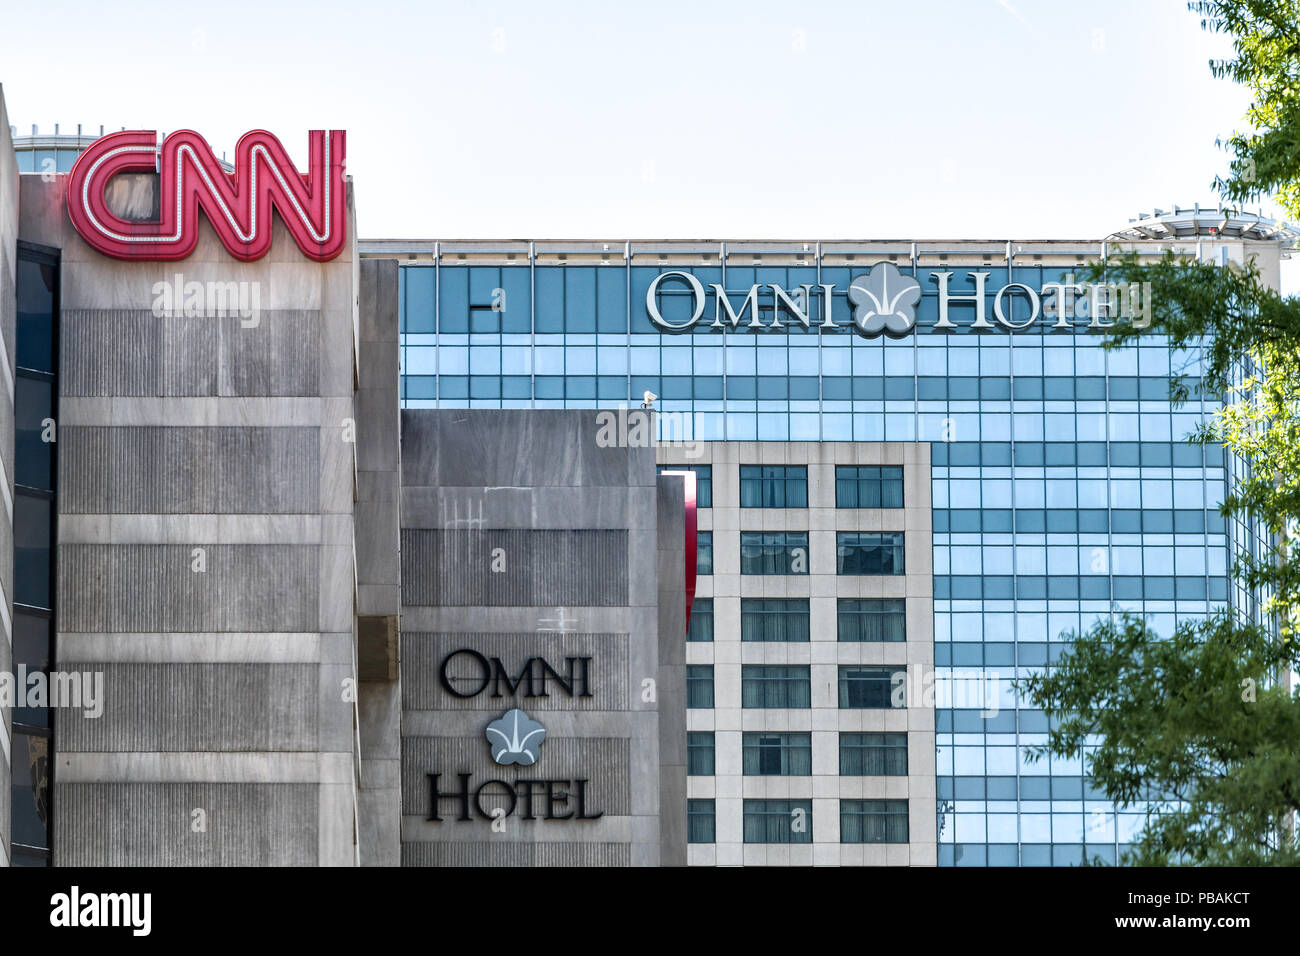 Atlanta, USA - April 20, 2018: CNN Center world headquarters and Omni Hotel buildings in downtown of city with signs Stock Photo